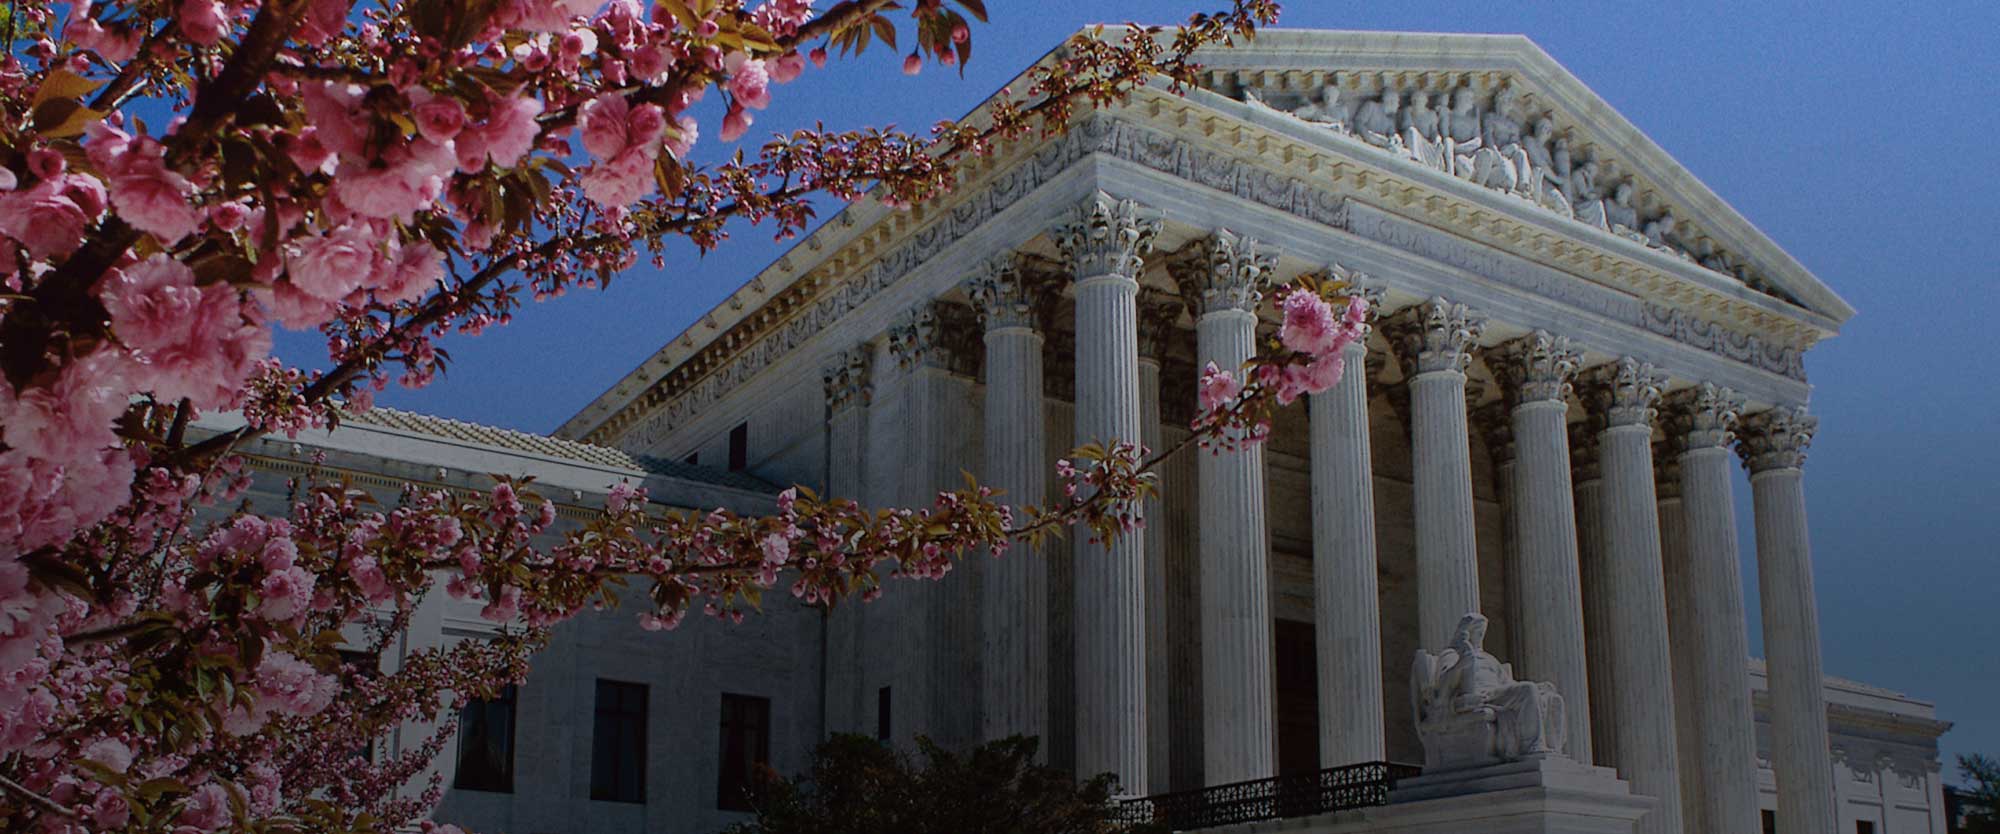 front of the supreme court building with  cherry blossom tree branches  on the side